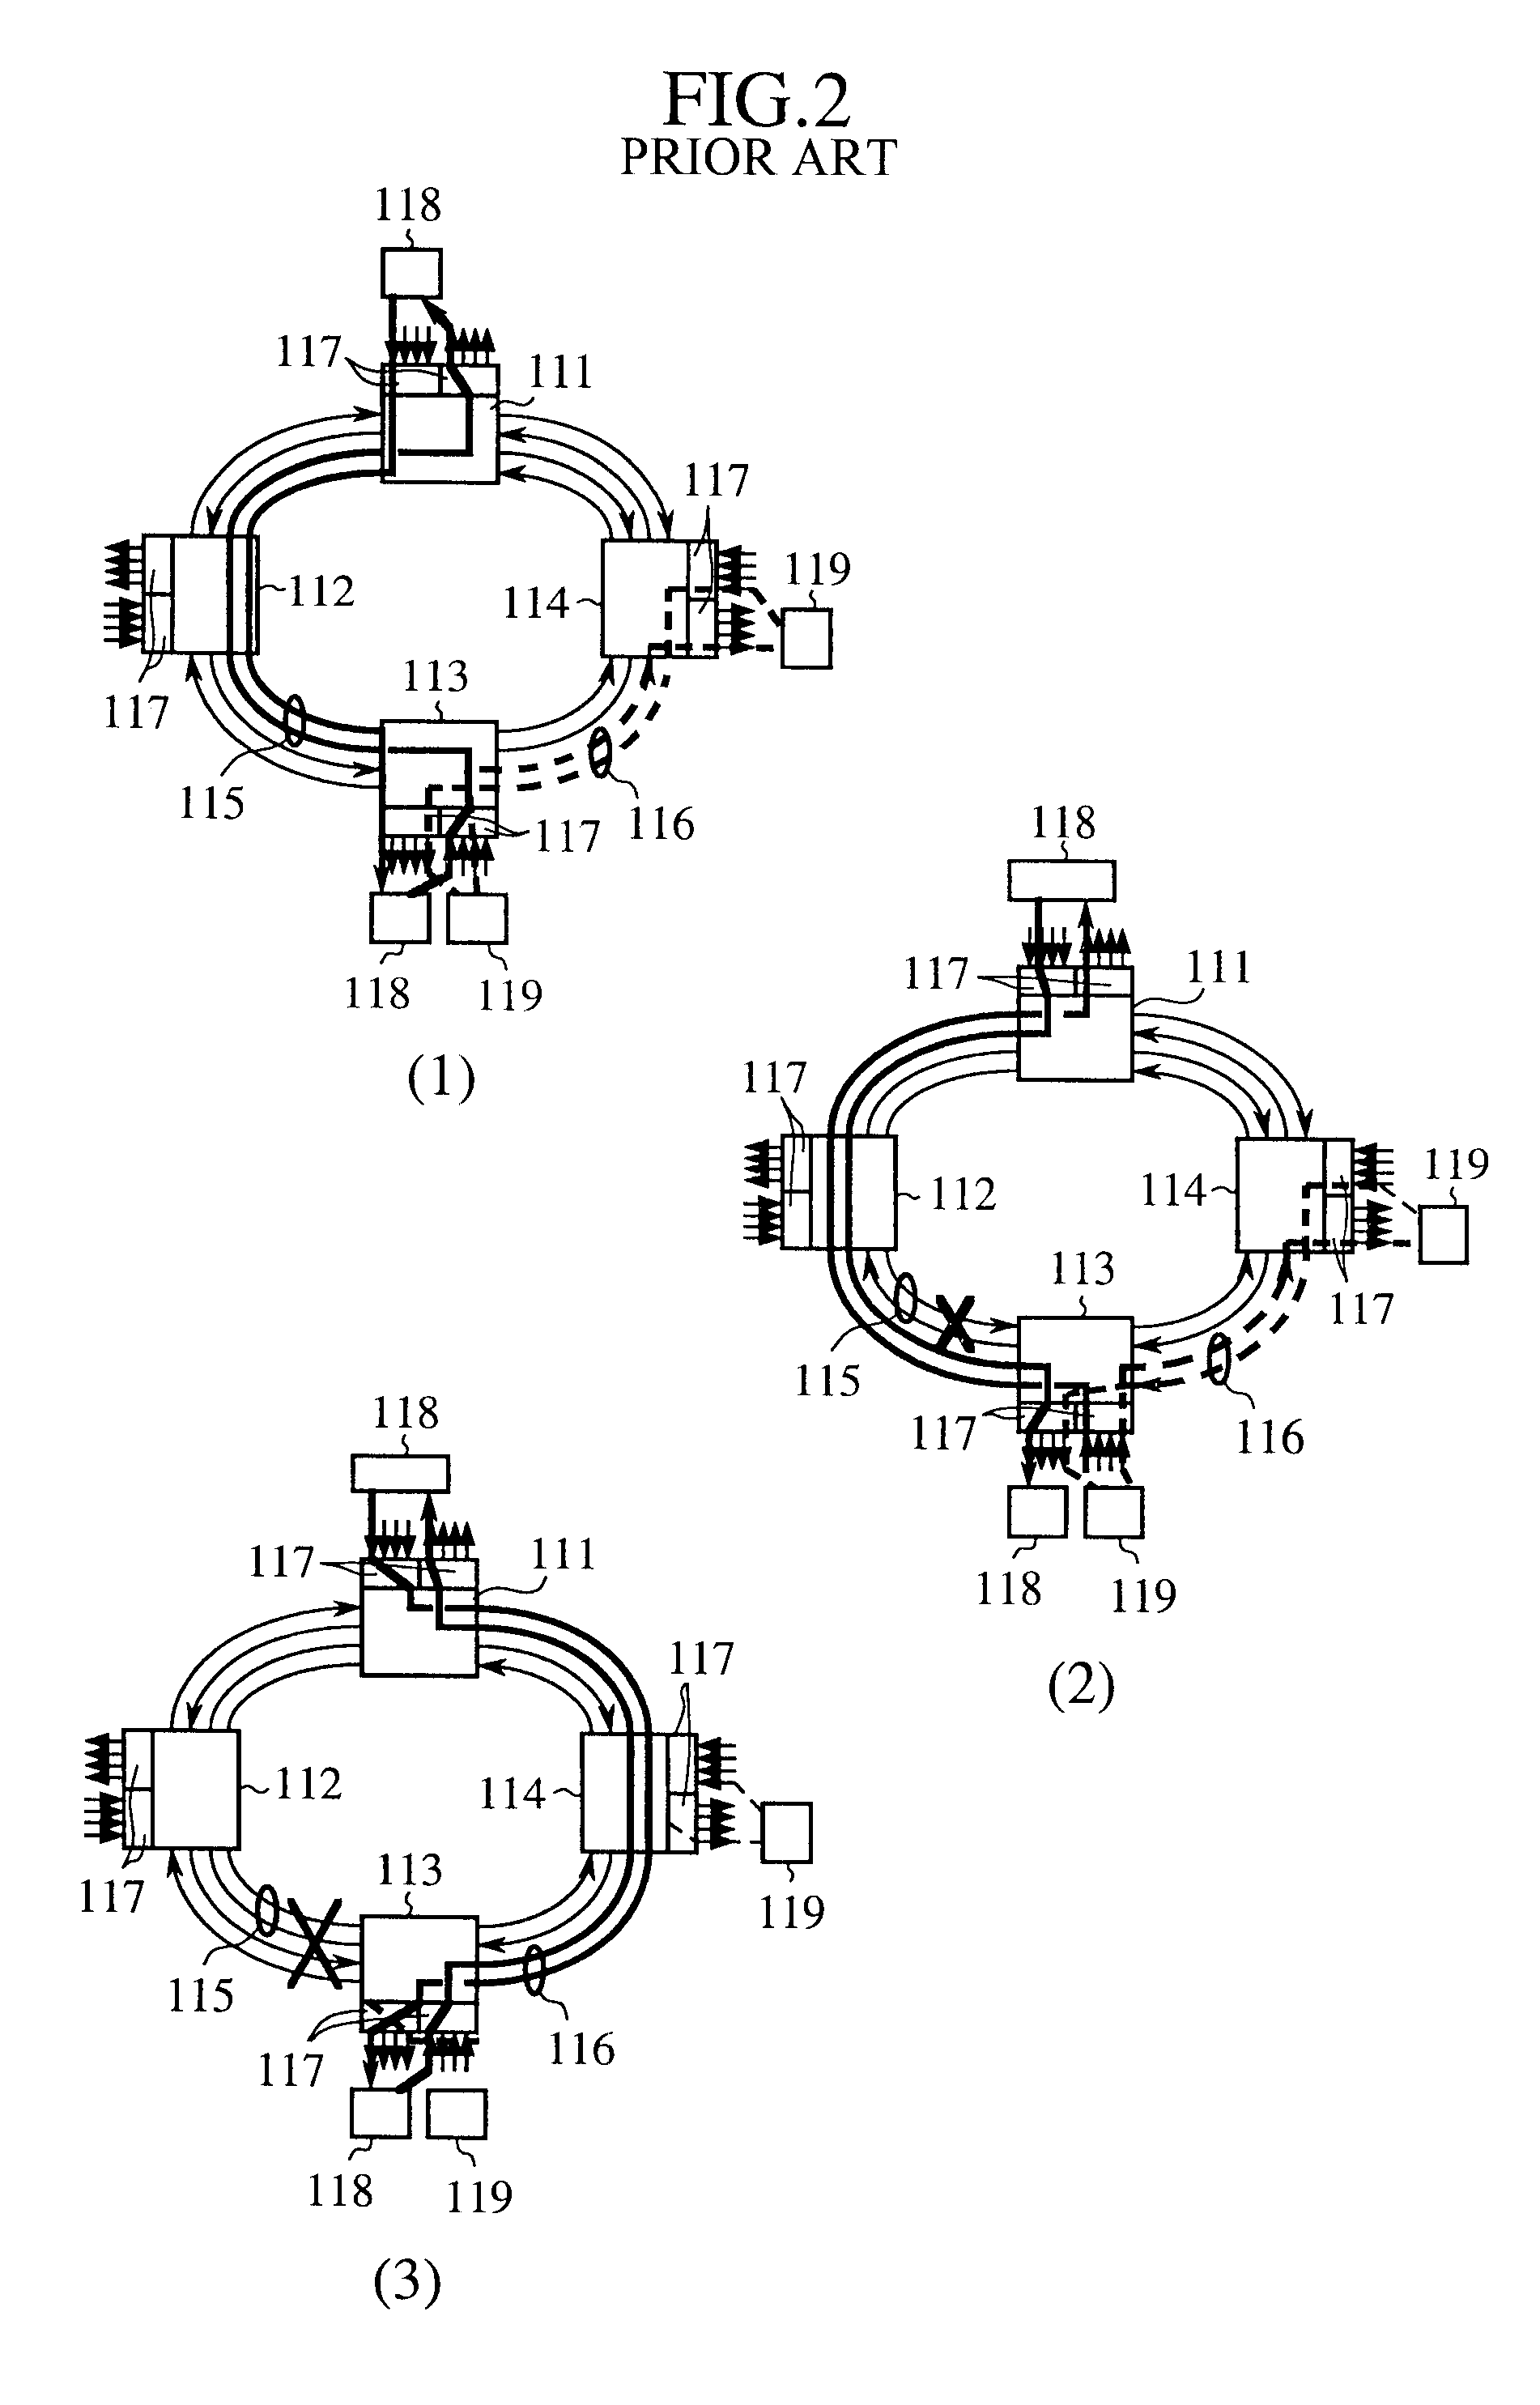 Optical switching system